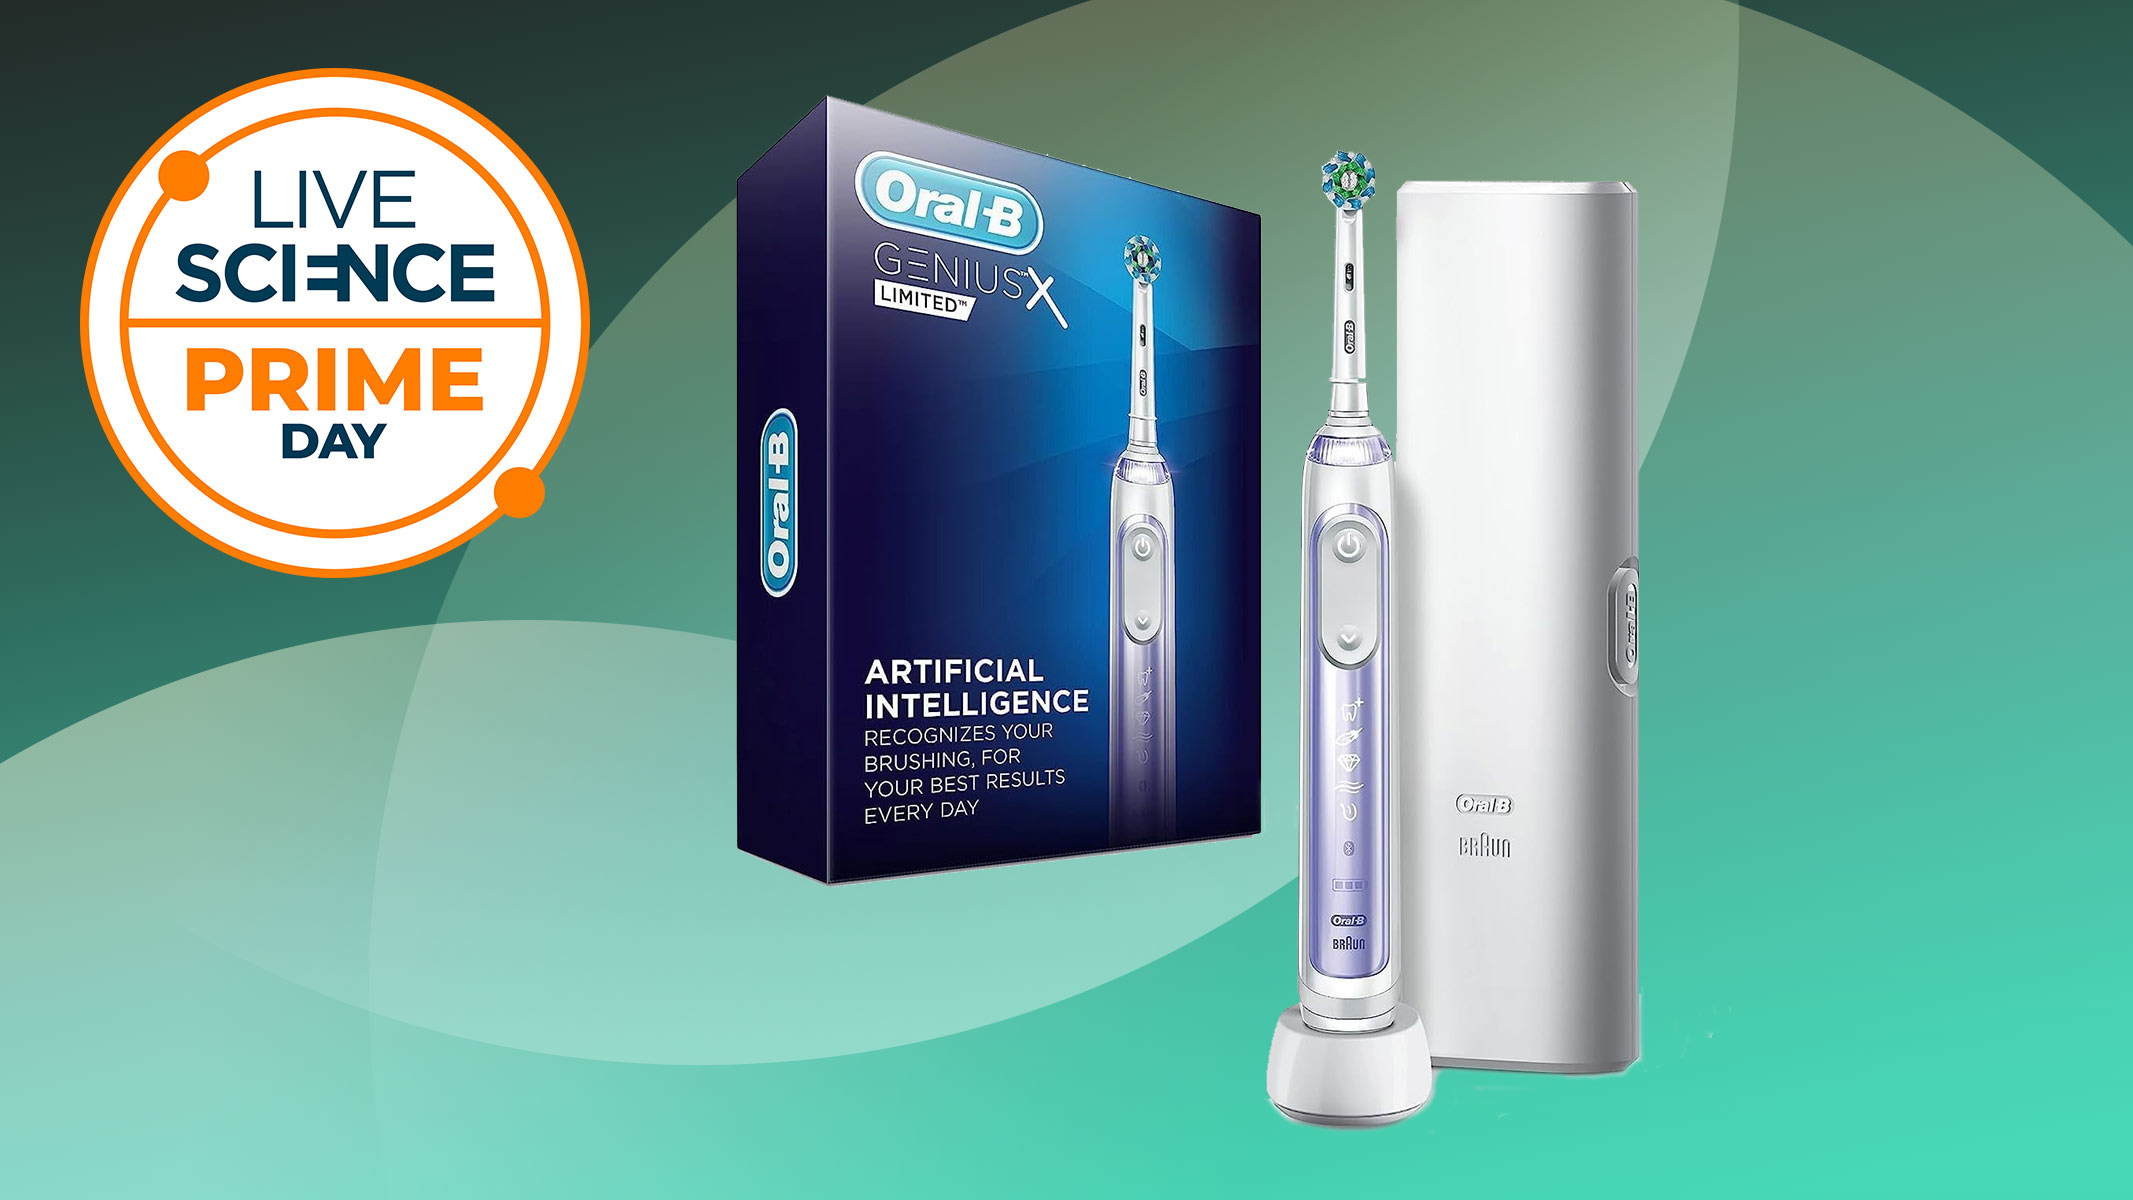  Our favorite Oral-B electric toothbrush is half-price this Amazon Prime Day 